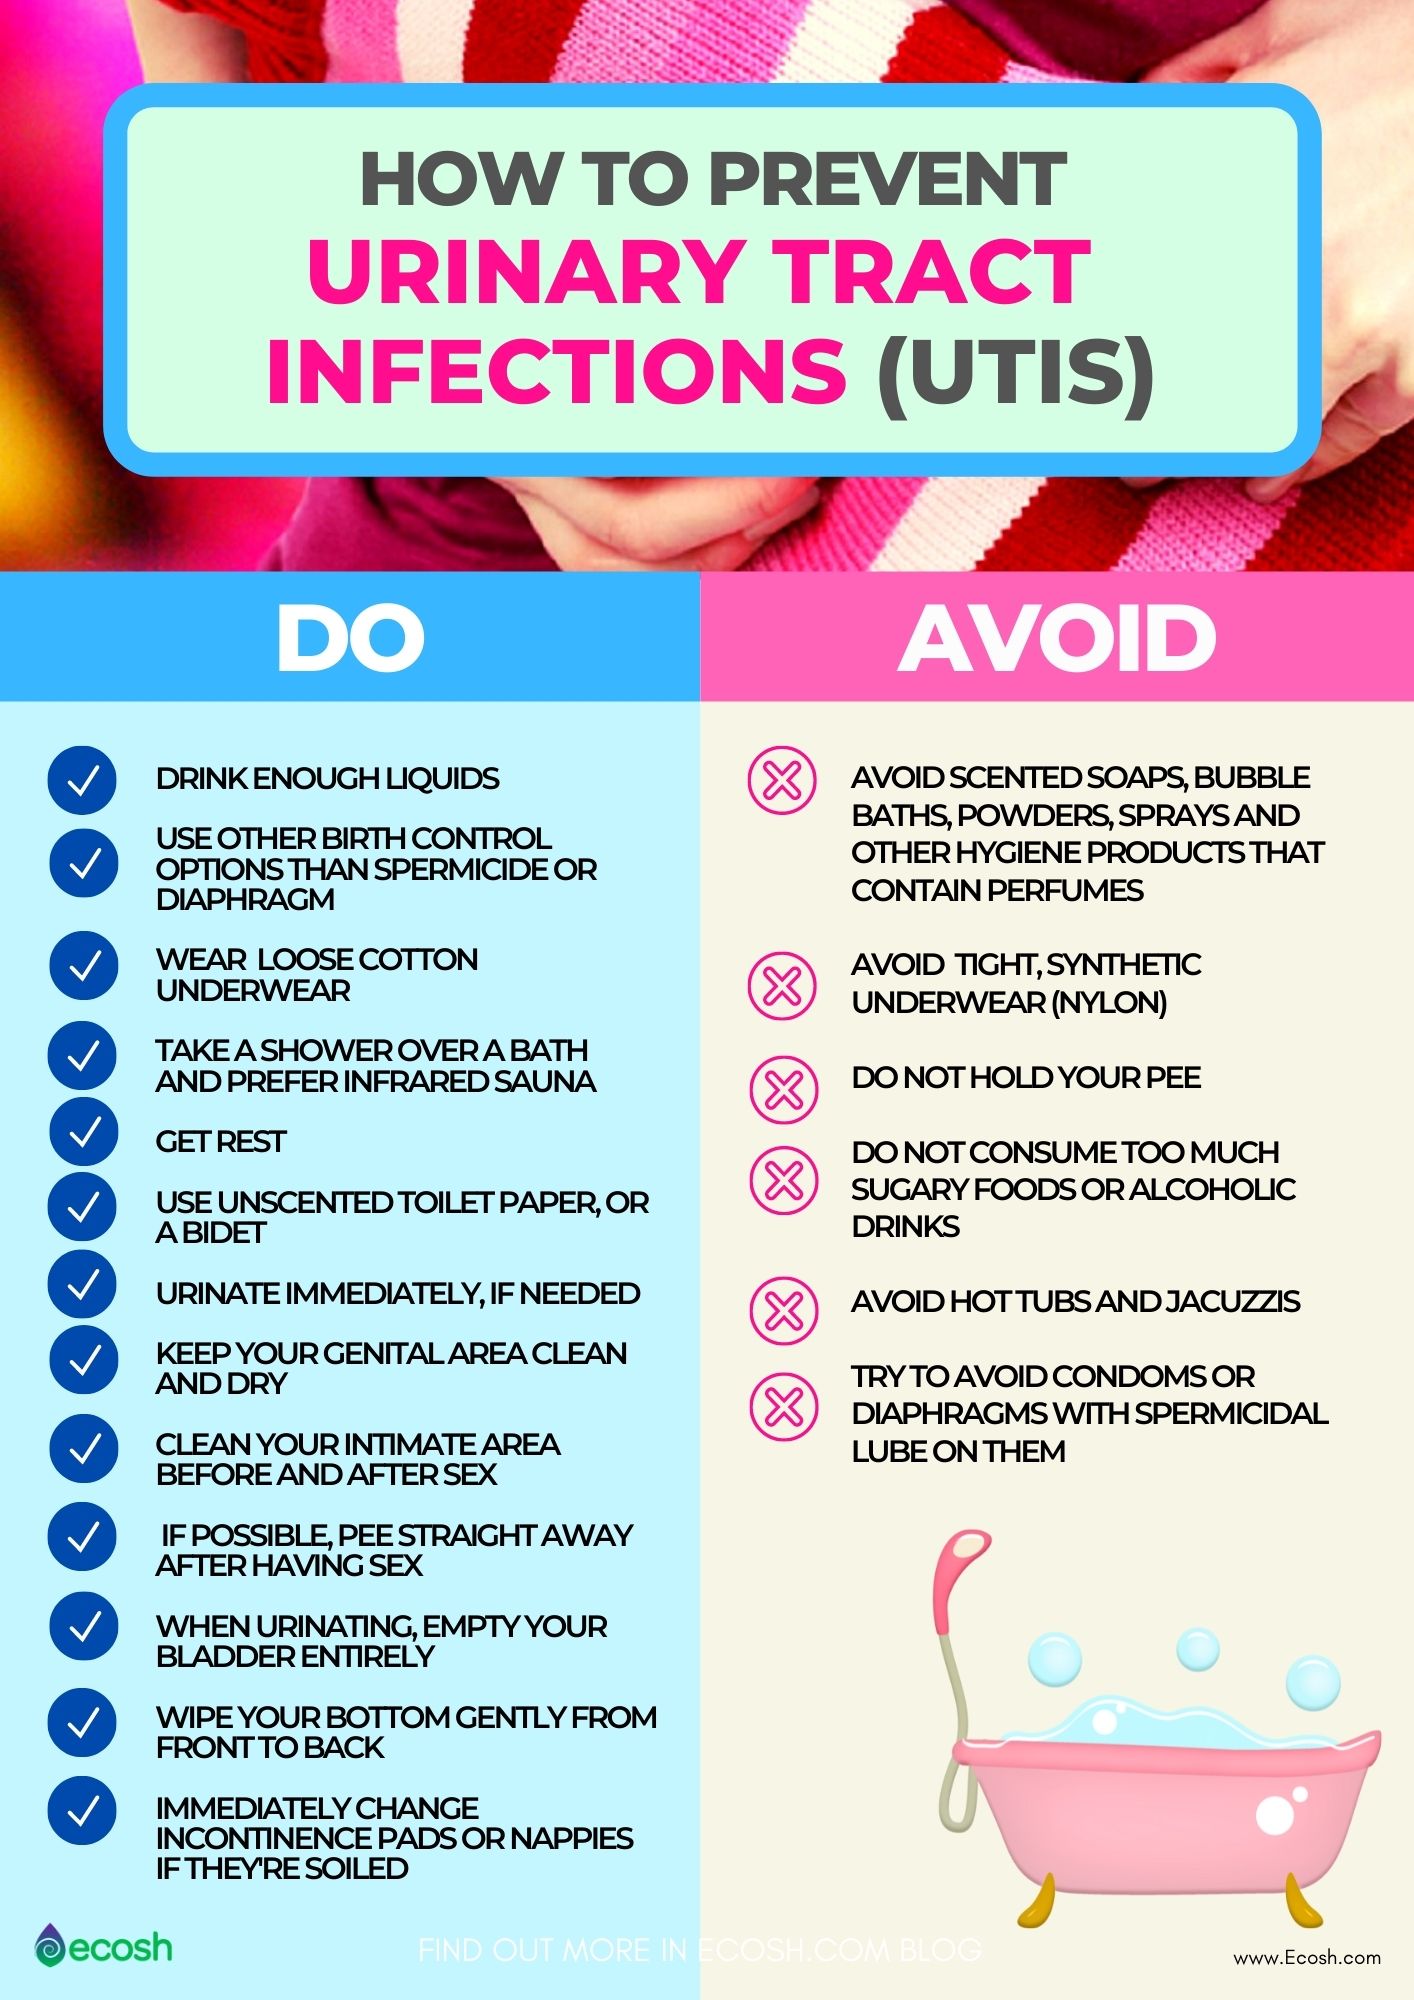 Tips_To_Prevent_UTIs_Tips_to_Prevent_Urinary_Tract_Infections_Naturally_How_to_Prevent_Urinary_Tract_Infections_How_to_Prevent_Bladder_Infections_Urinary_Tract_Infections_Prevention_UTIs_